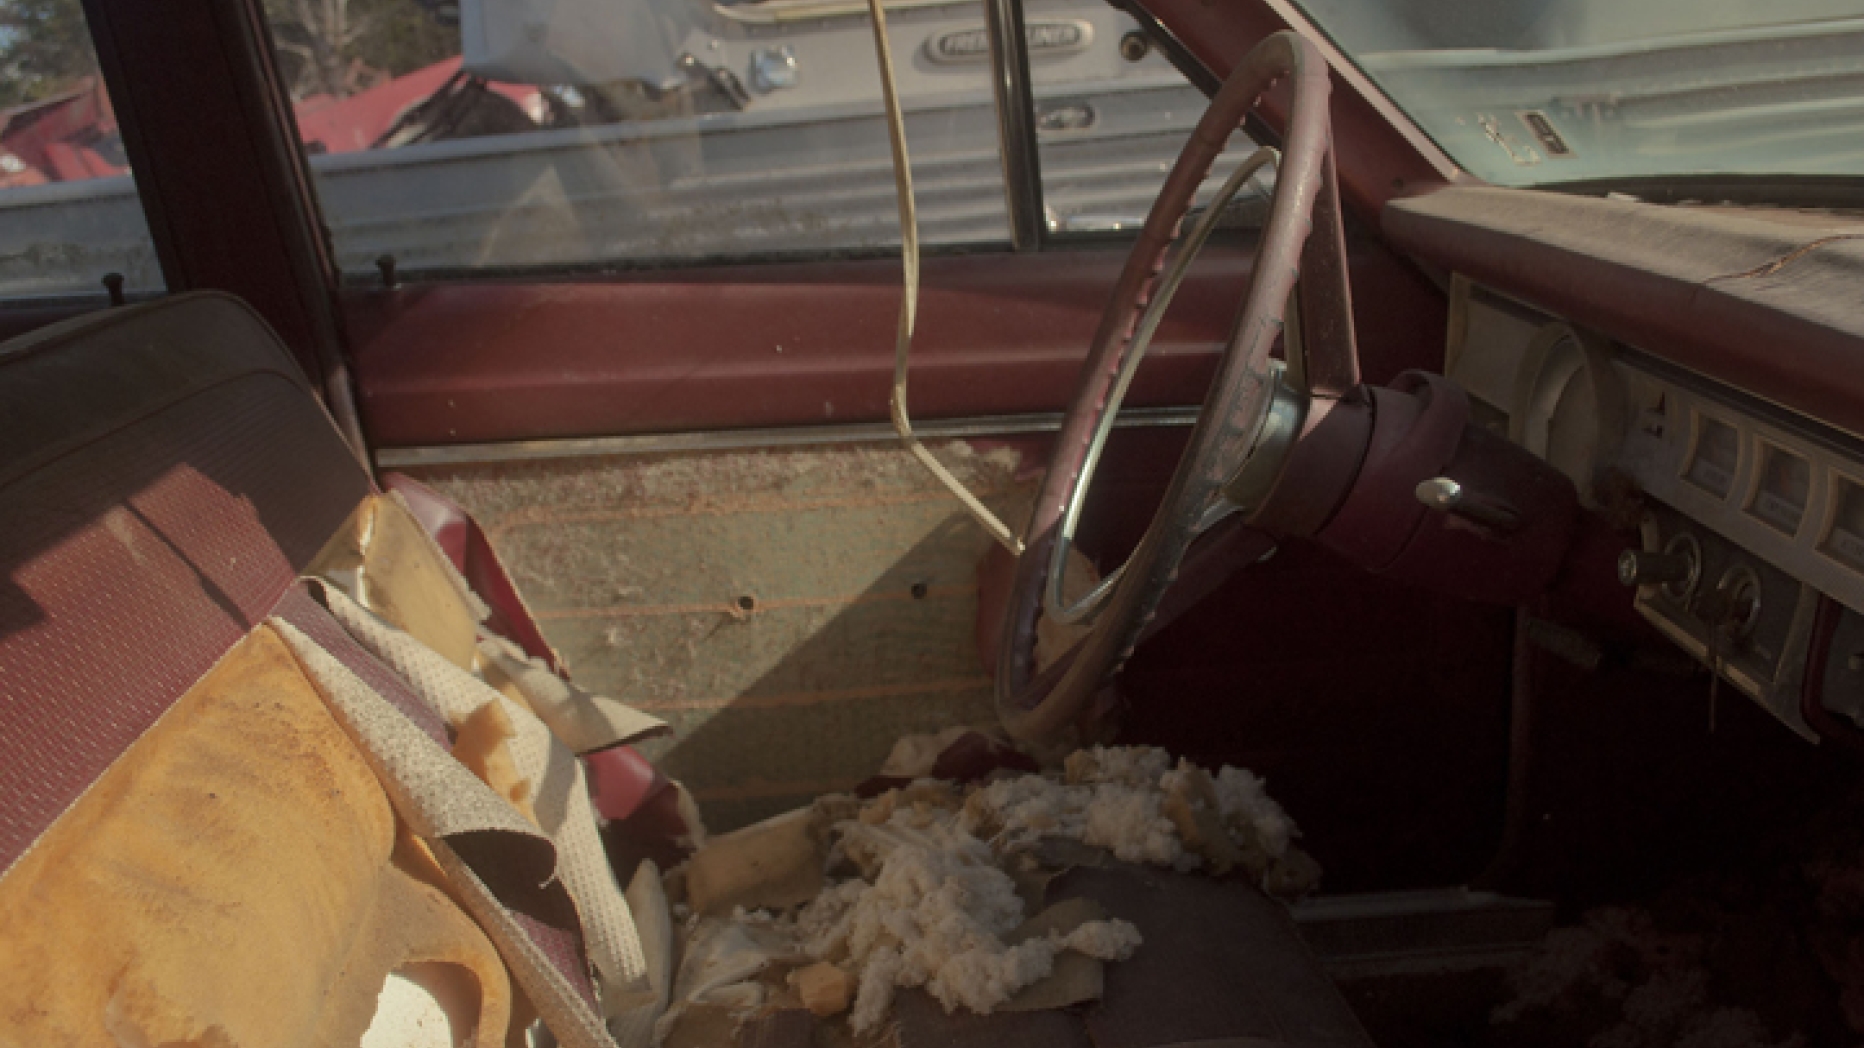 Photograph of the inside of a car. The lighting is warm but the seats of the car have been torn up and are in disrepair.